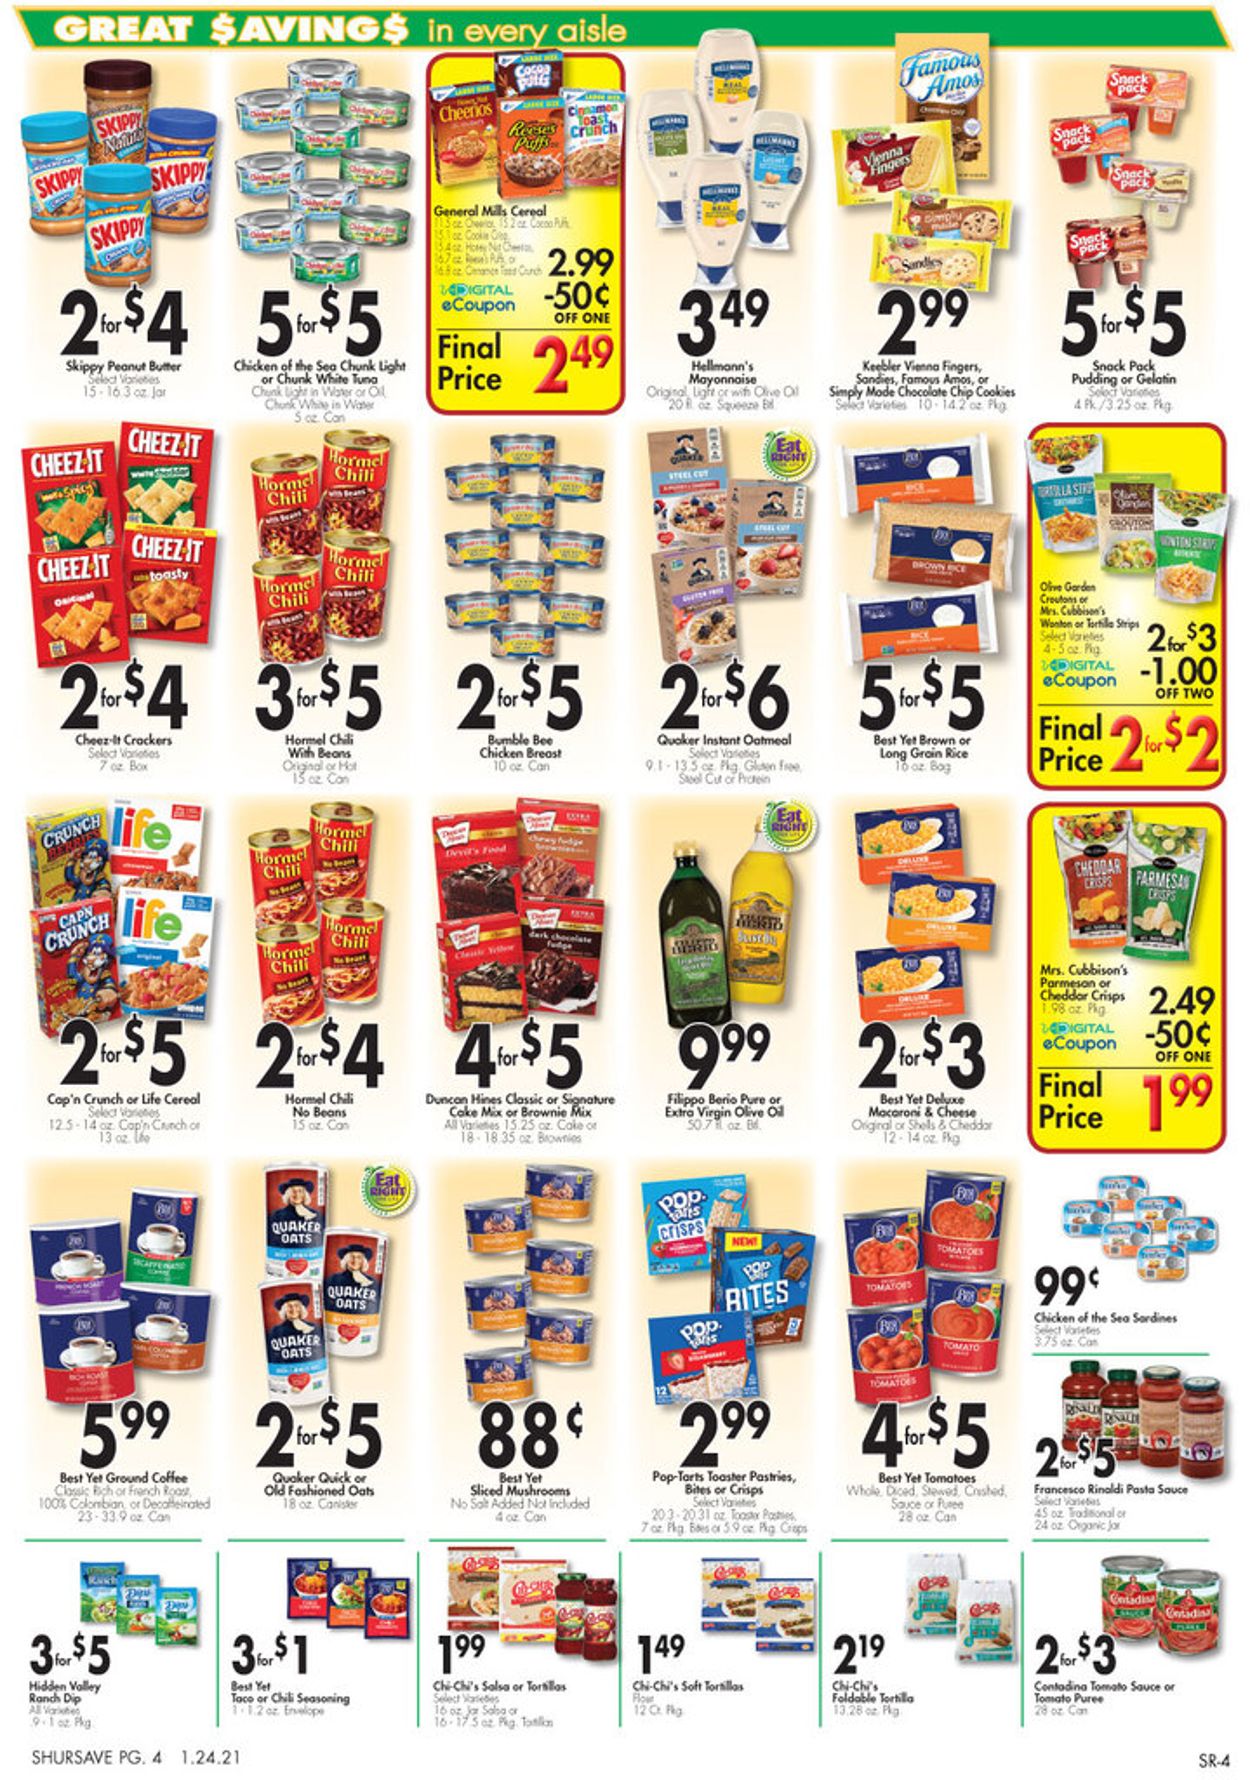 Catalogue Gerrity's Supermarkets from 01/24/2021